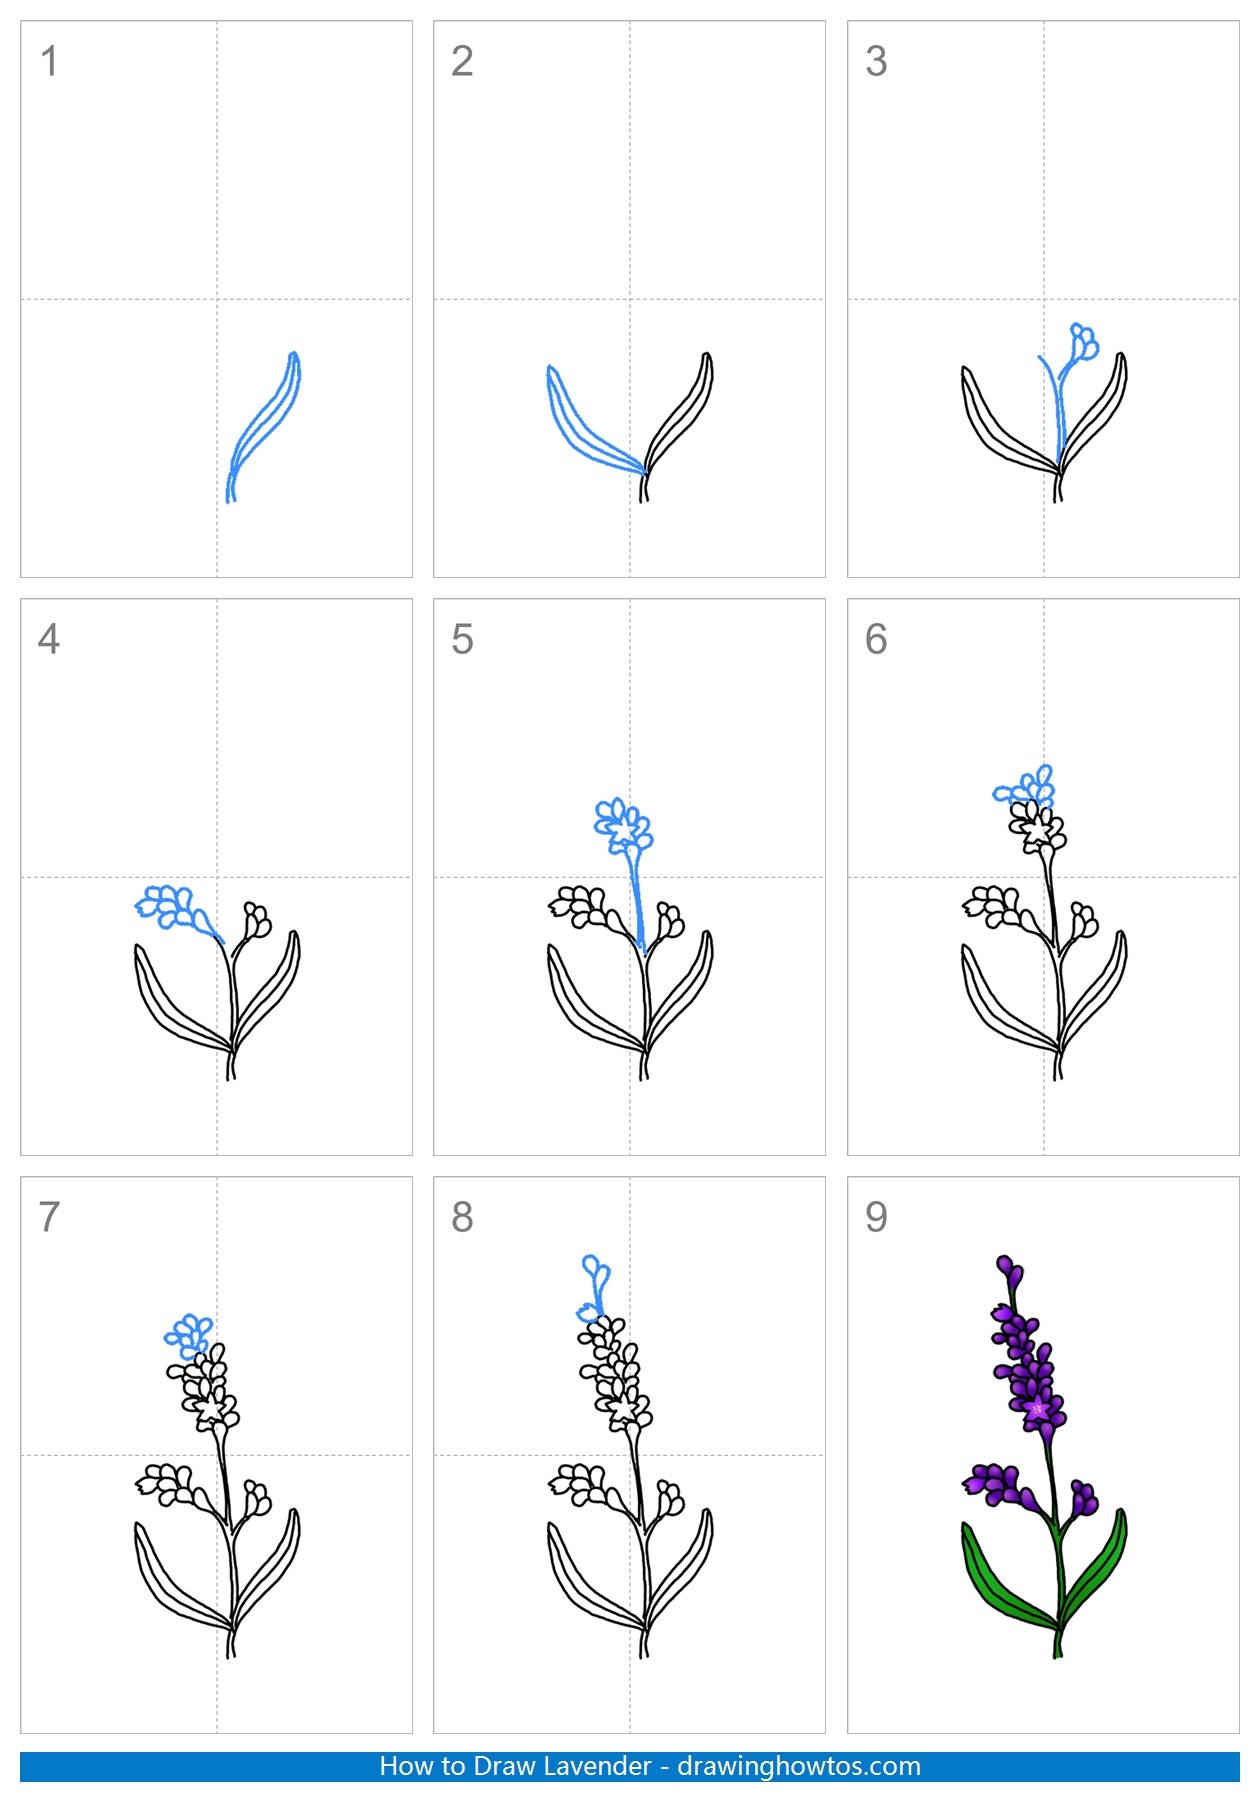 How to Draw Lavender Flowers Step by Step